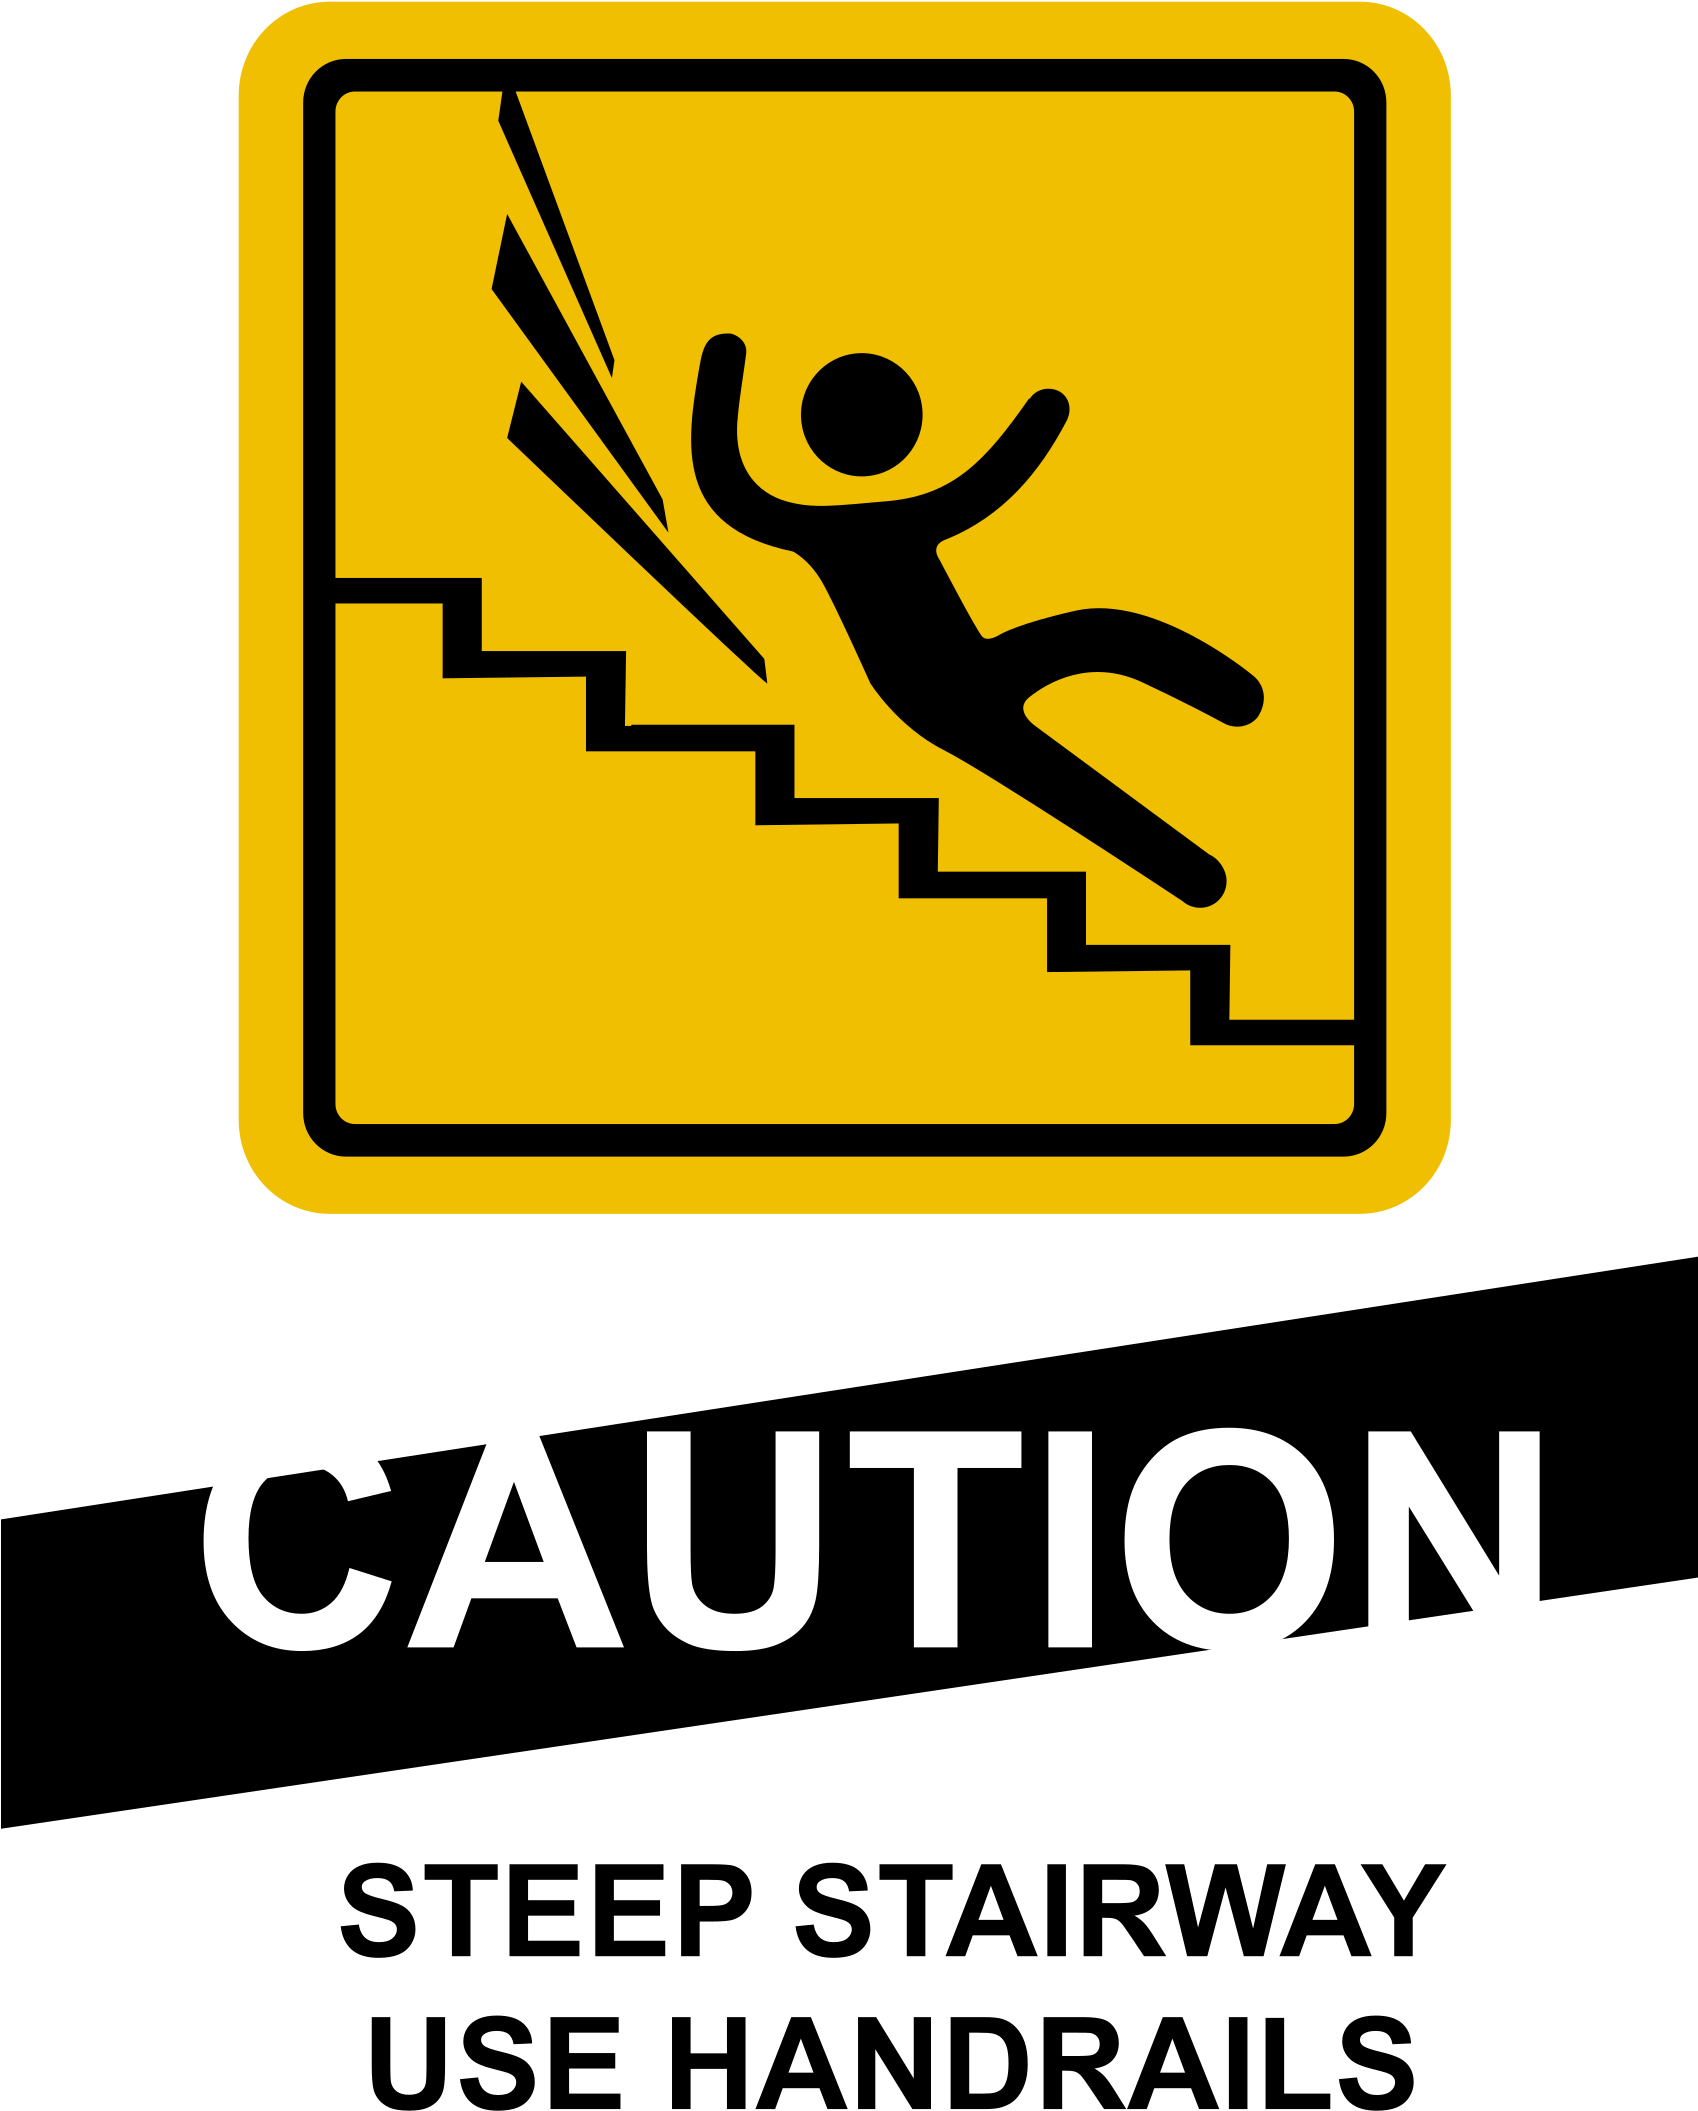 Caution Steep Stairs - Caution Stairs Sign (1697x2400)